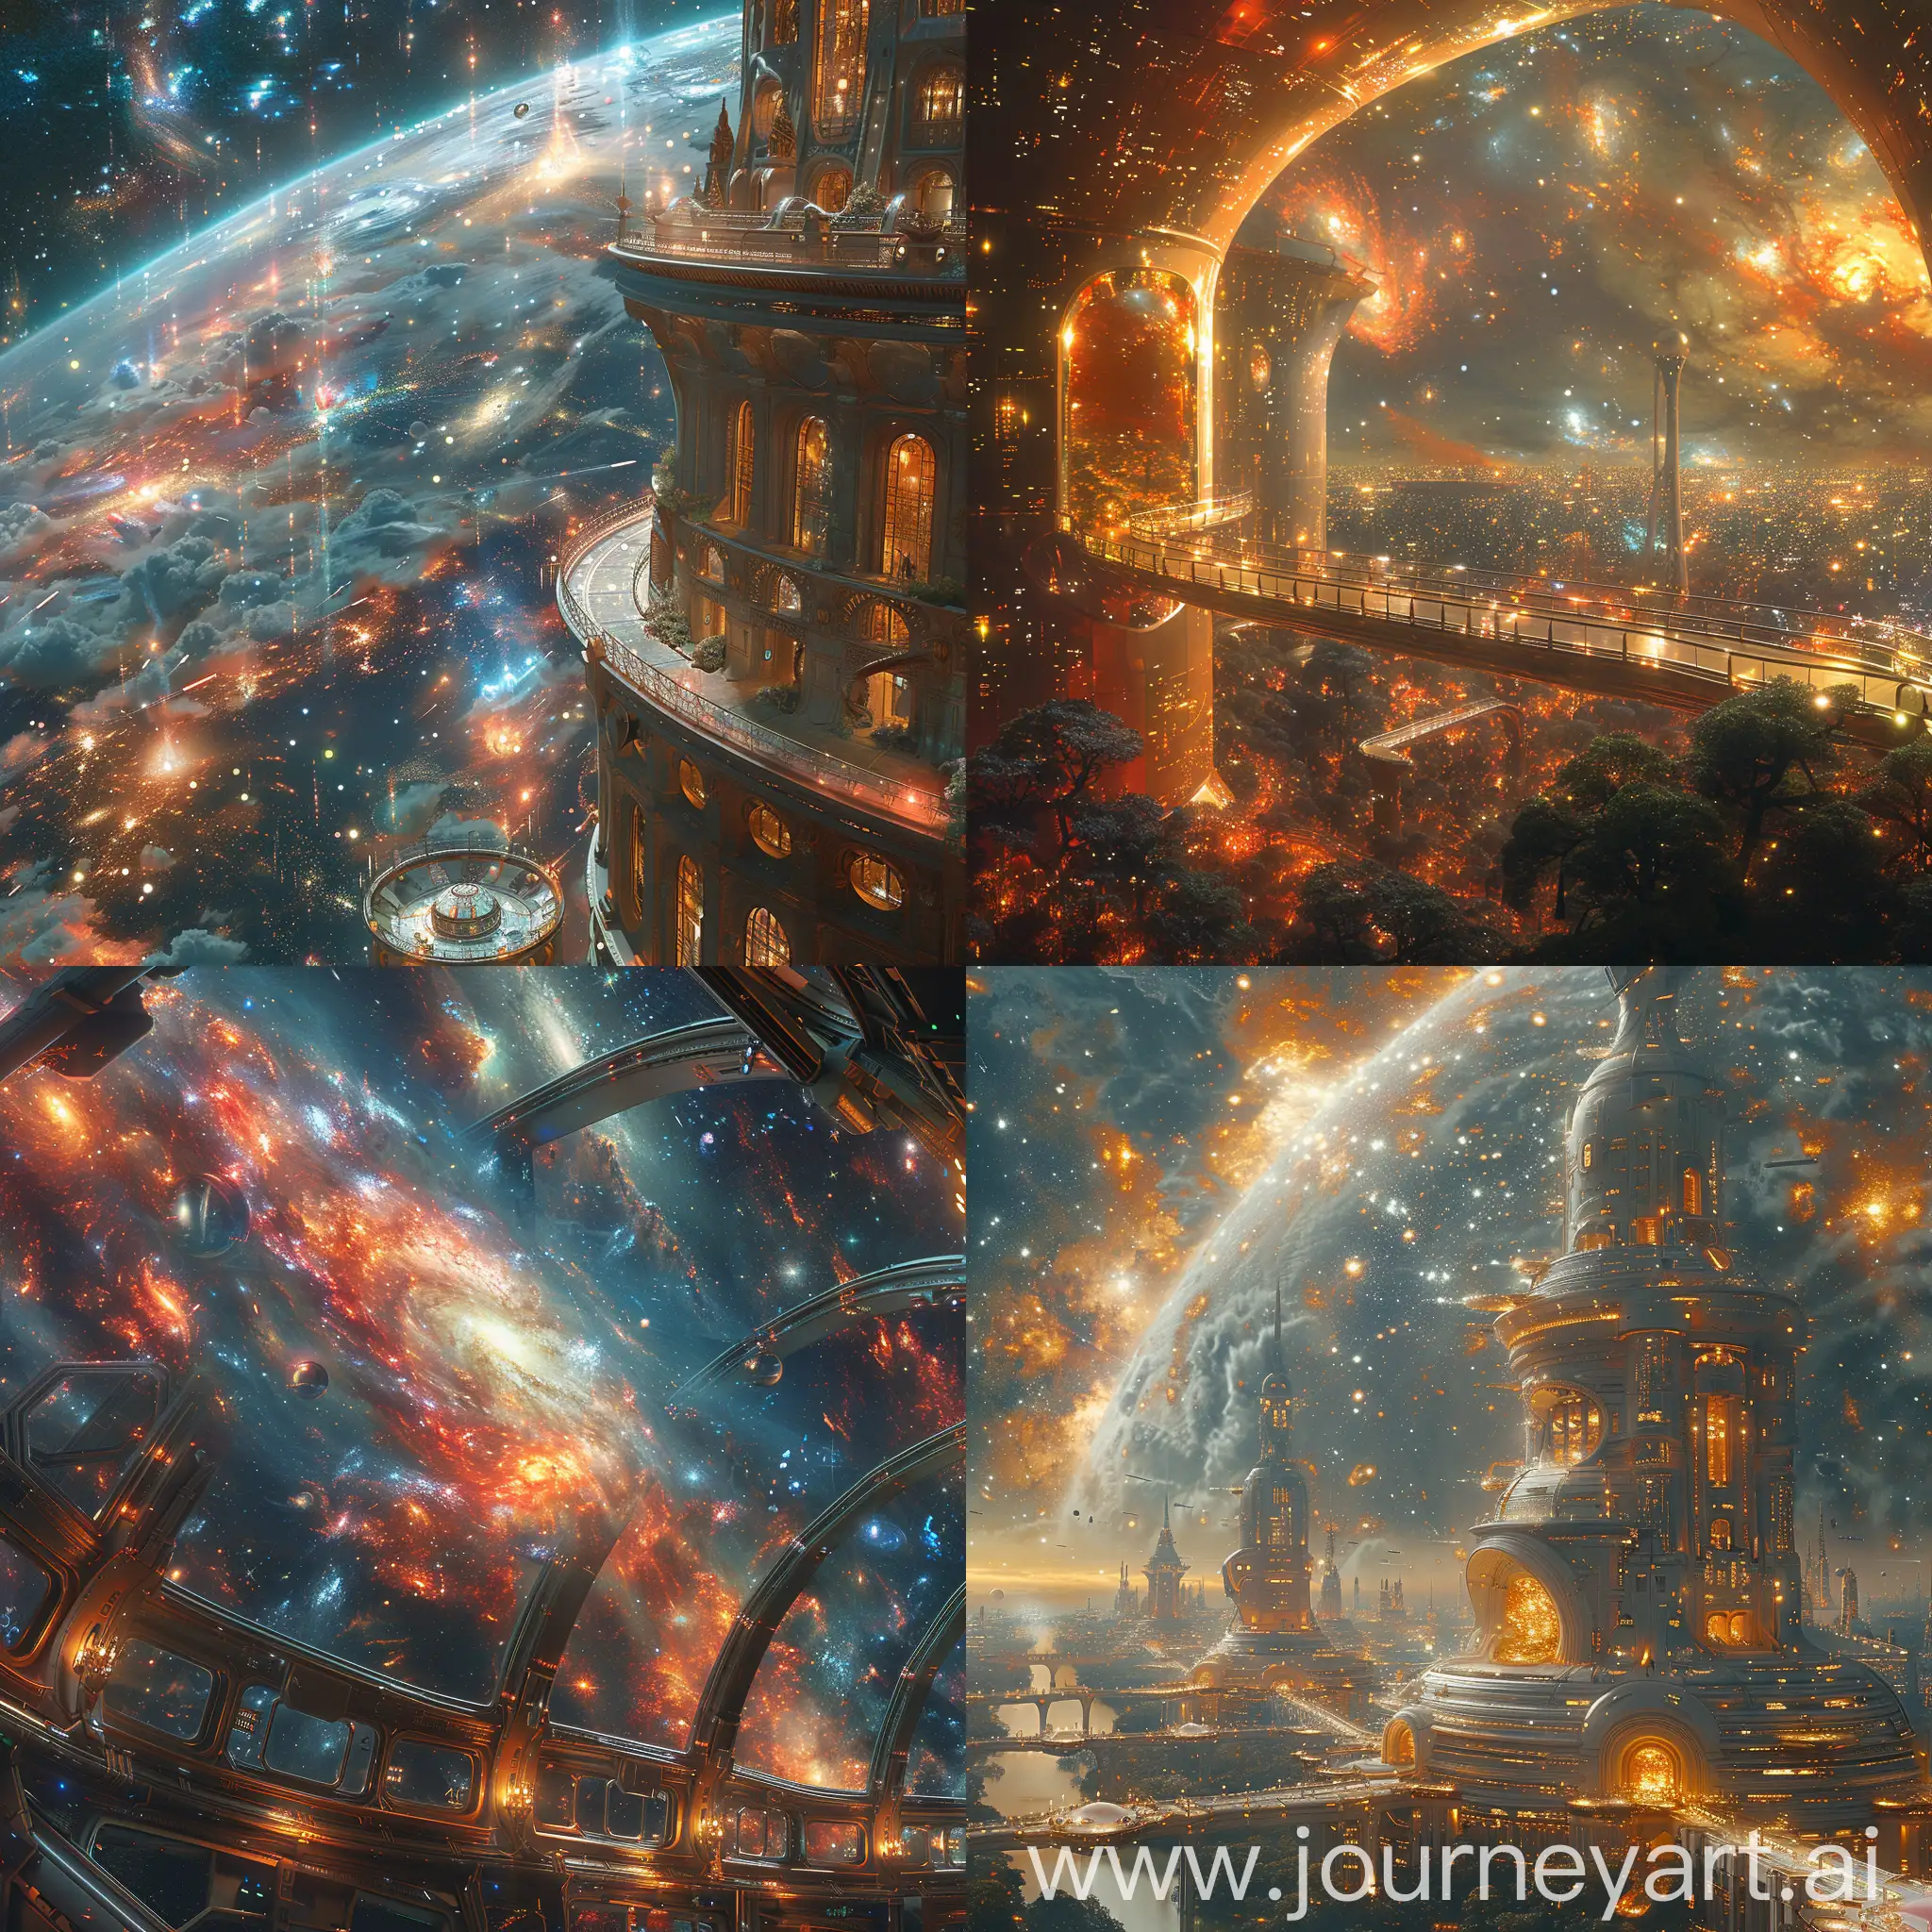 Utopian-Space-Telescope-HyperDetailed-Concept-Art-with-Vibrant-Nebulas-and-Alien-Technology